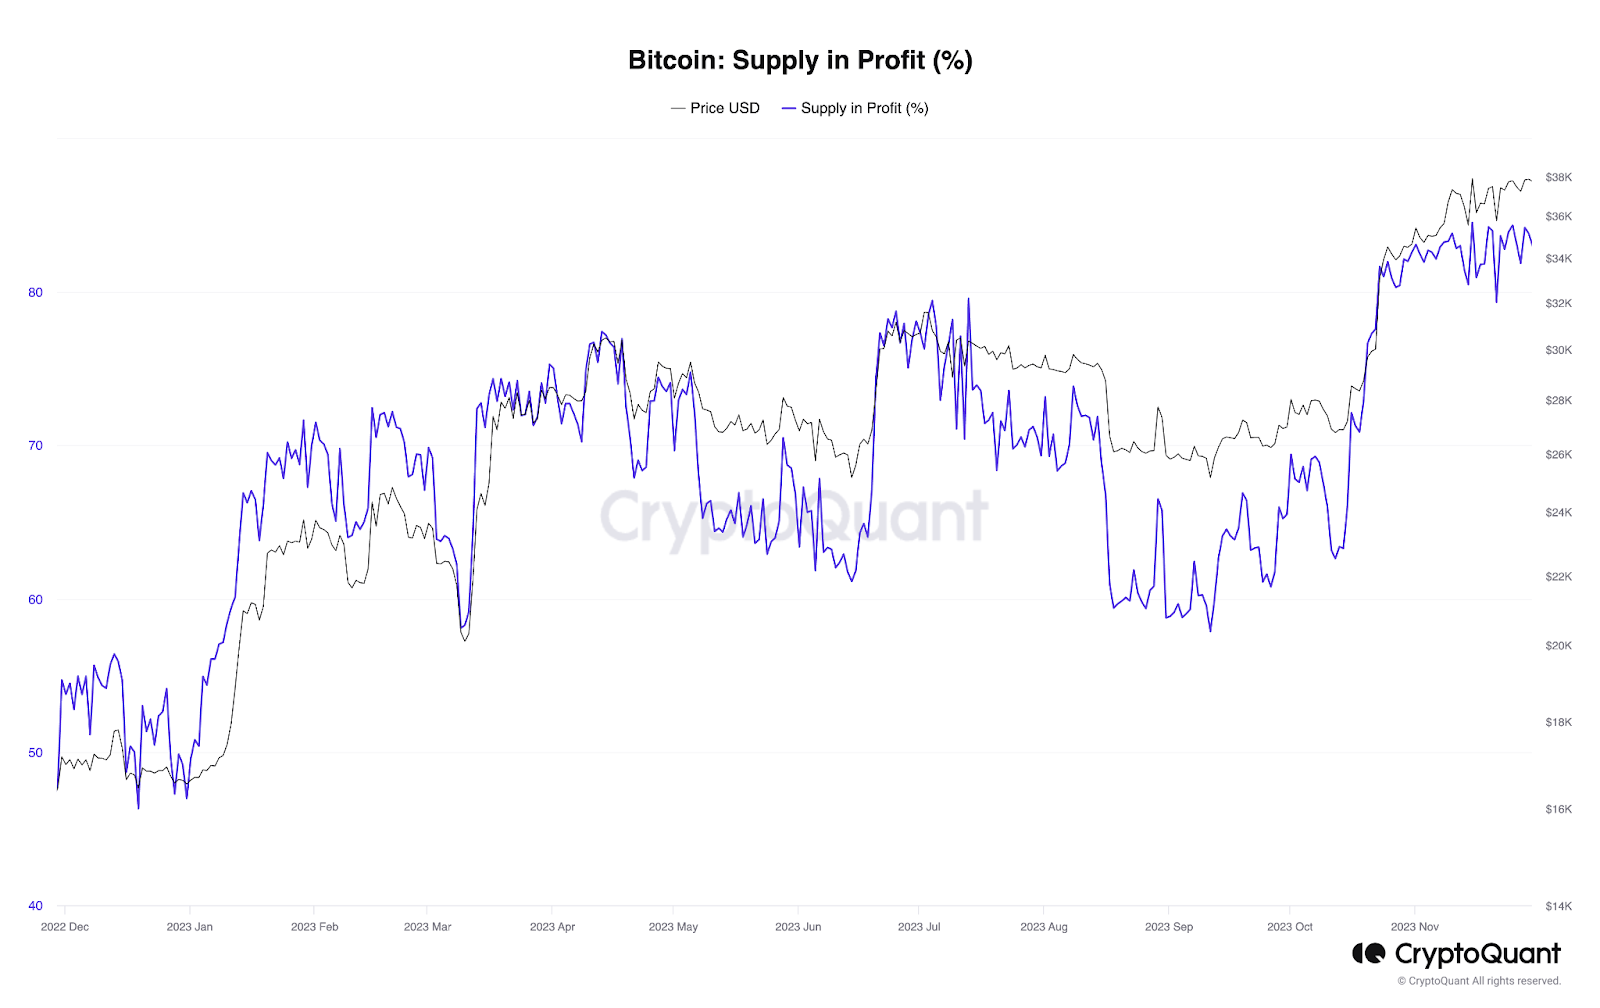 Bitcoin Supply in Profit (%). Source: CryptoQuant